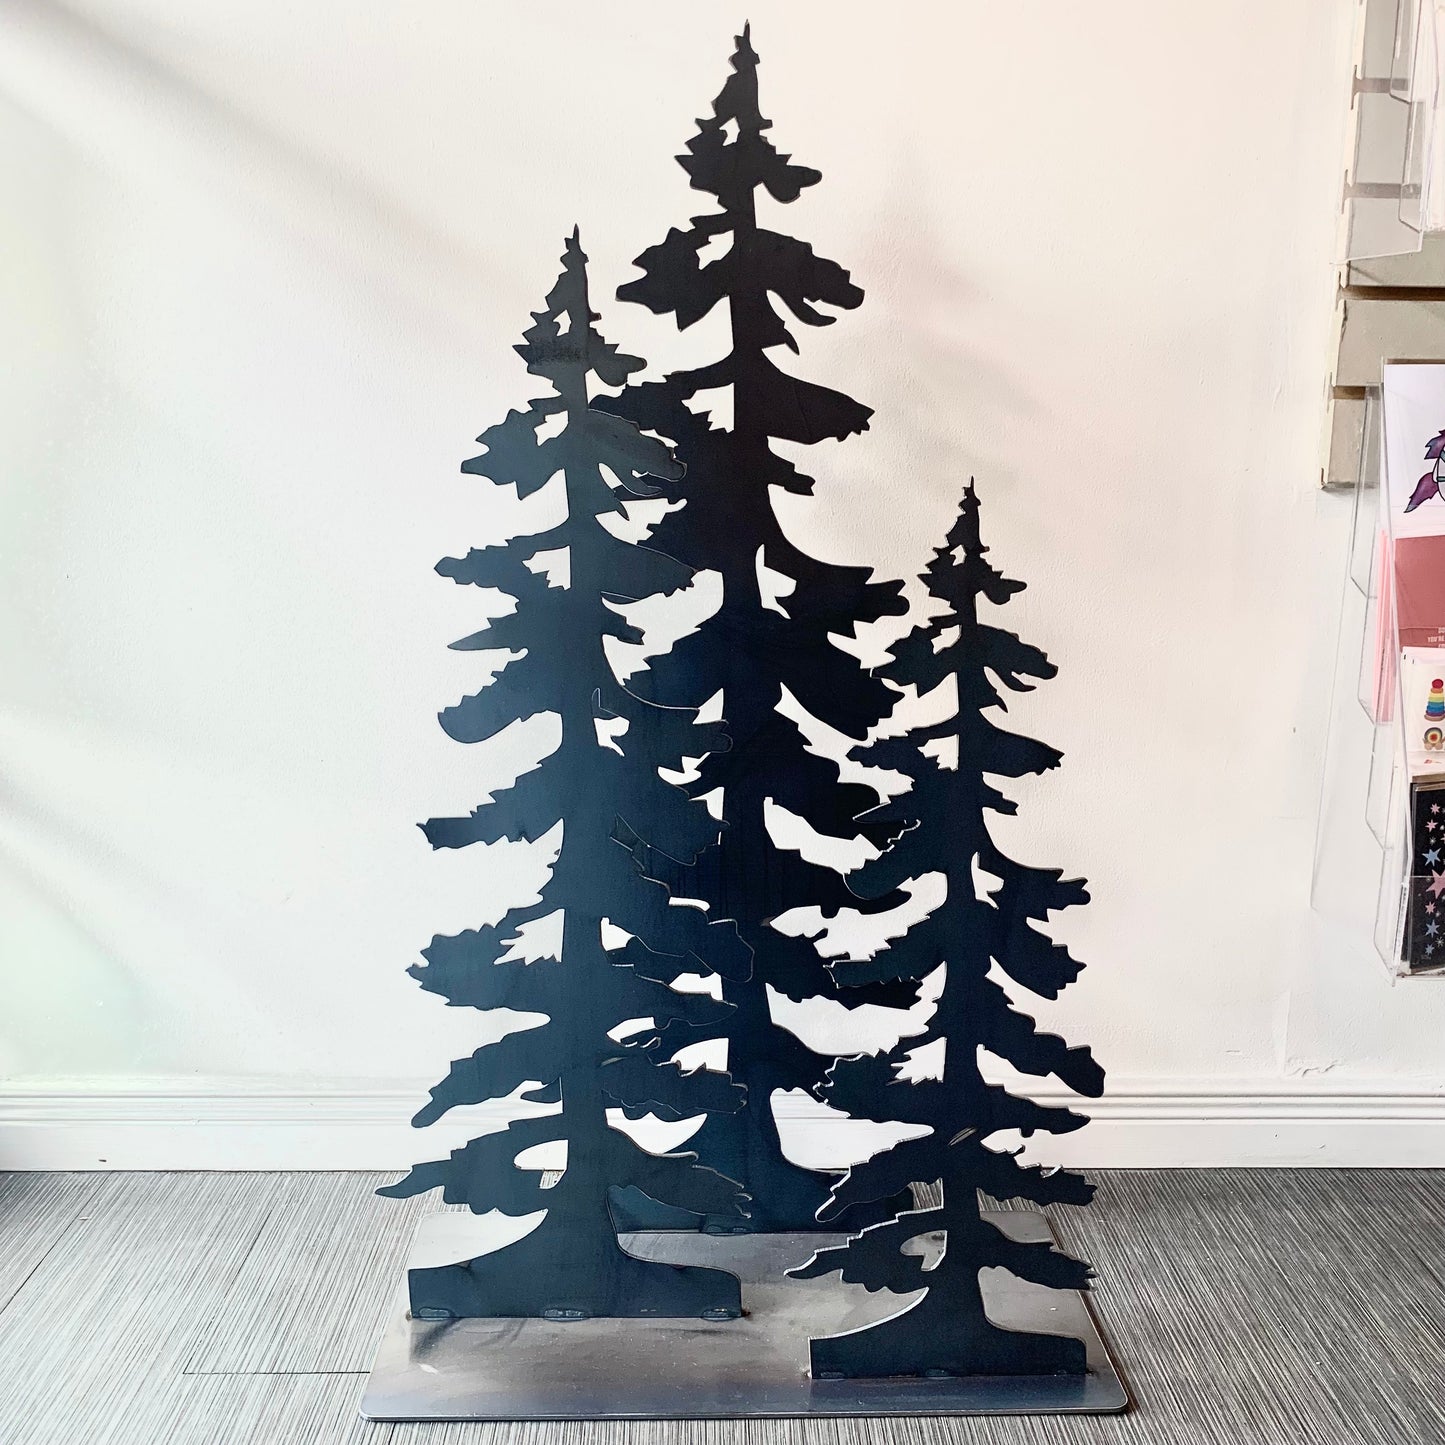 Reclaimed Metal Scupltures - Group Of Trees (Extra Large)